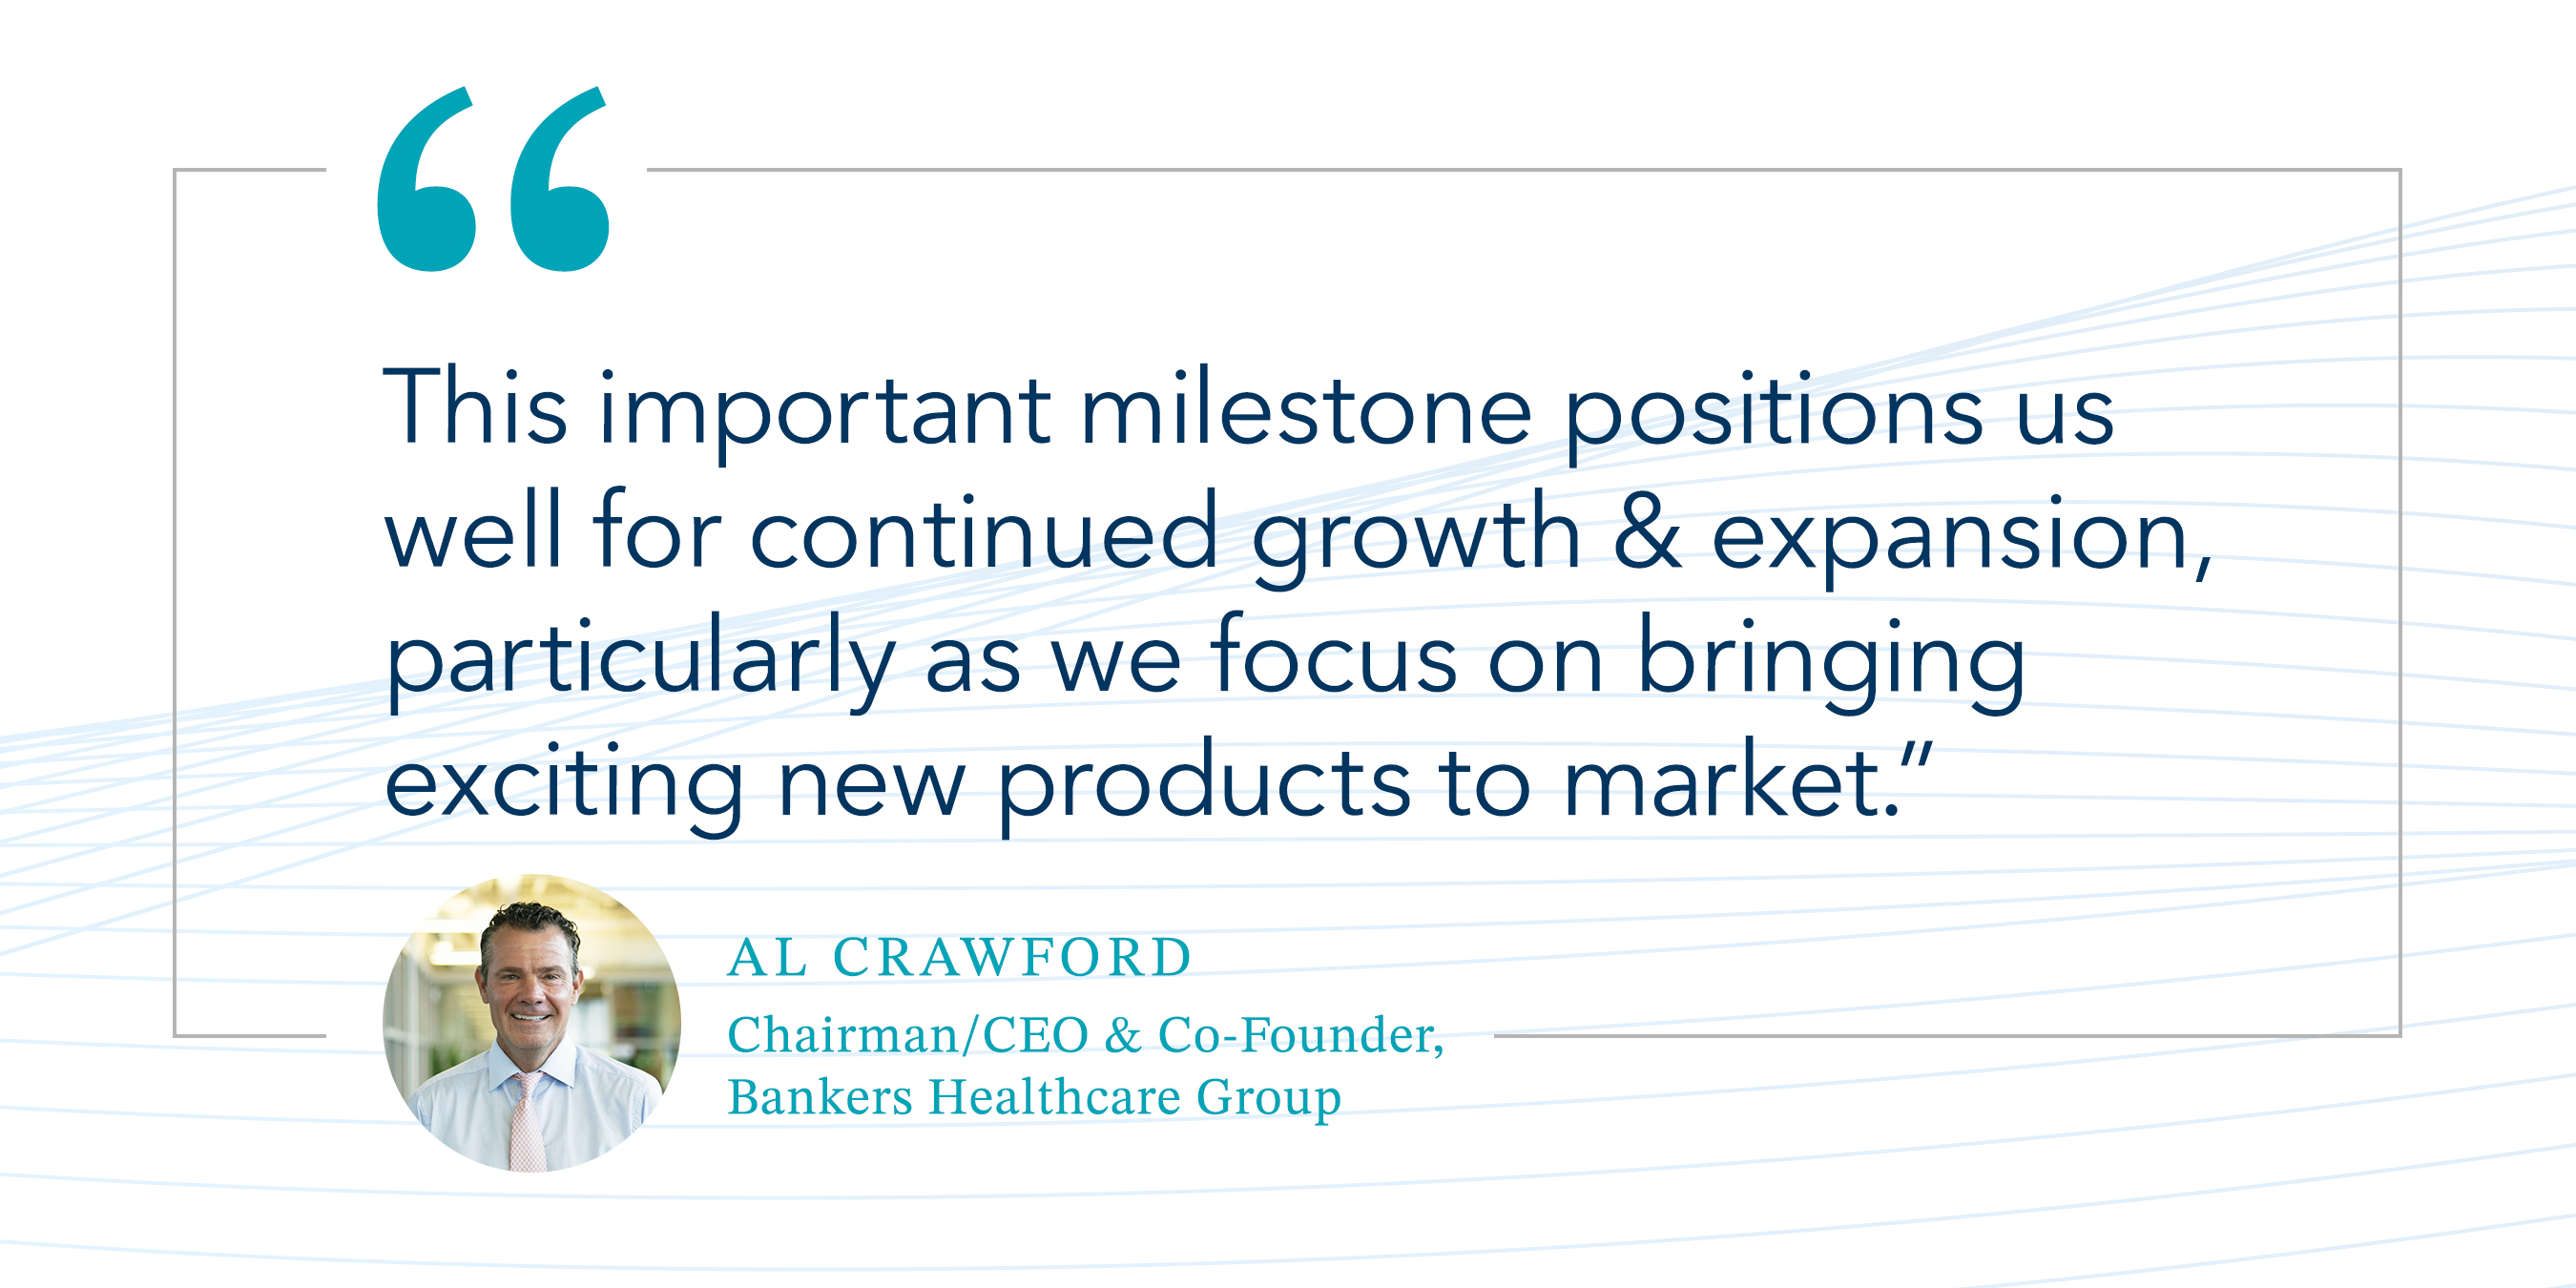 Al Crawford, Chairman/CEO and Co-Founder, Bankers Healthcare Group